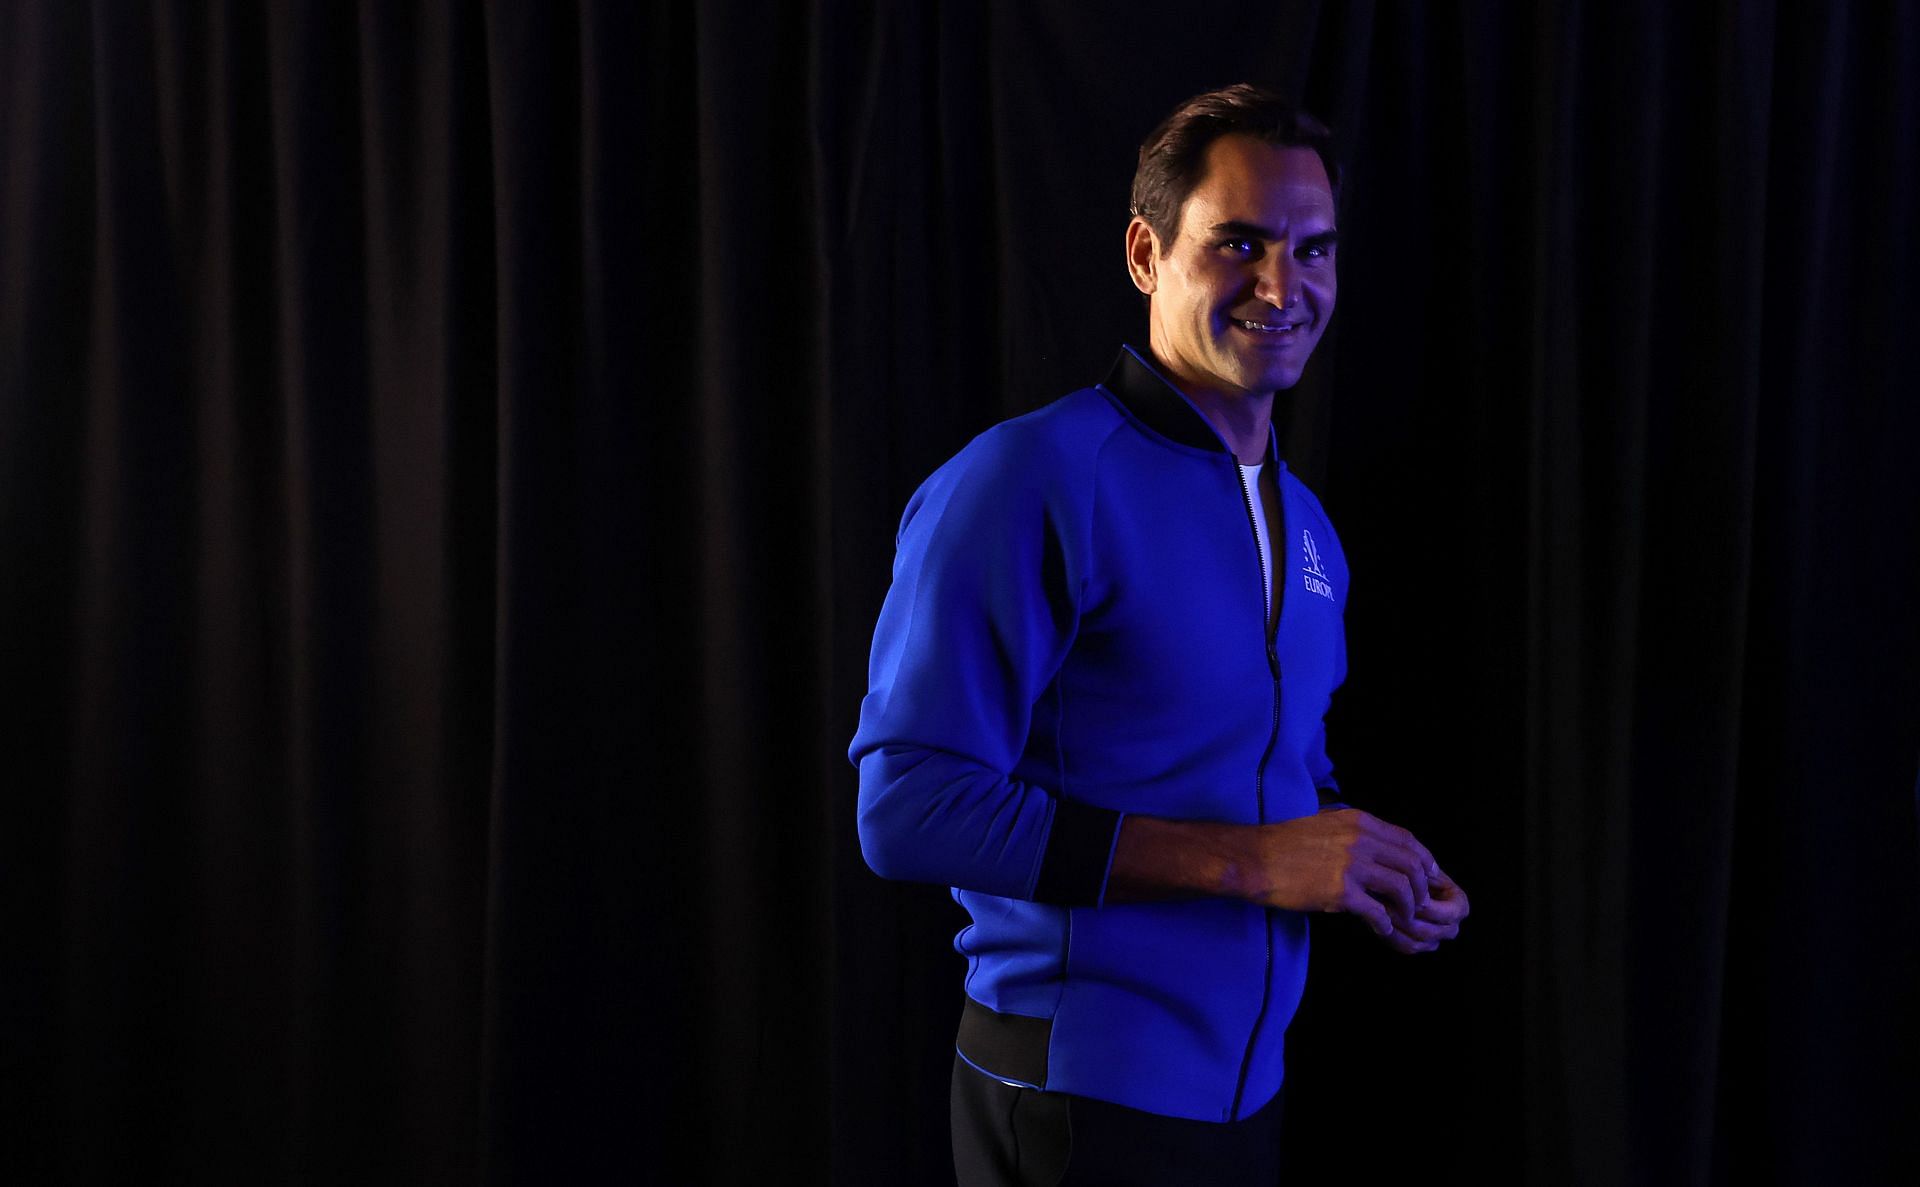 Roger Federer pictured at the Laver Cup 2022 - Day Three.